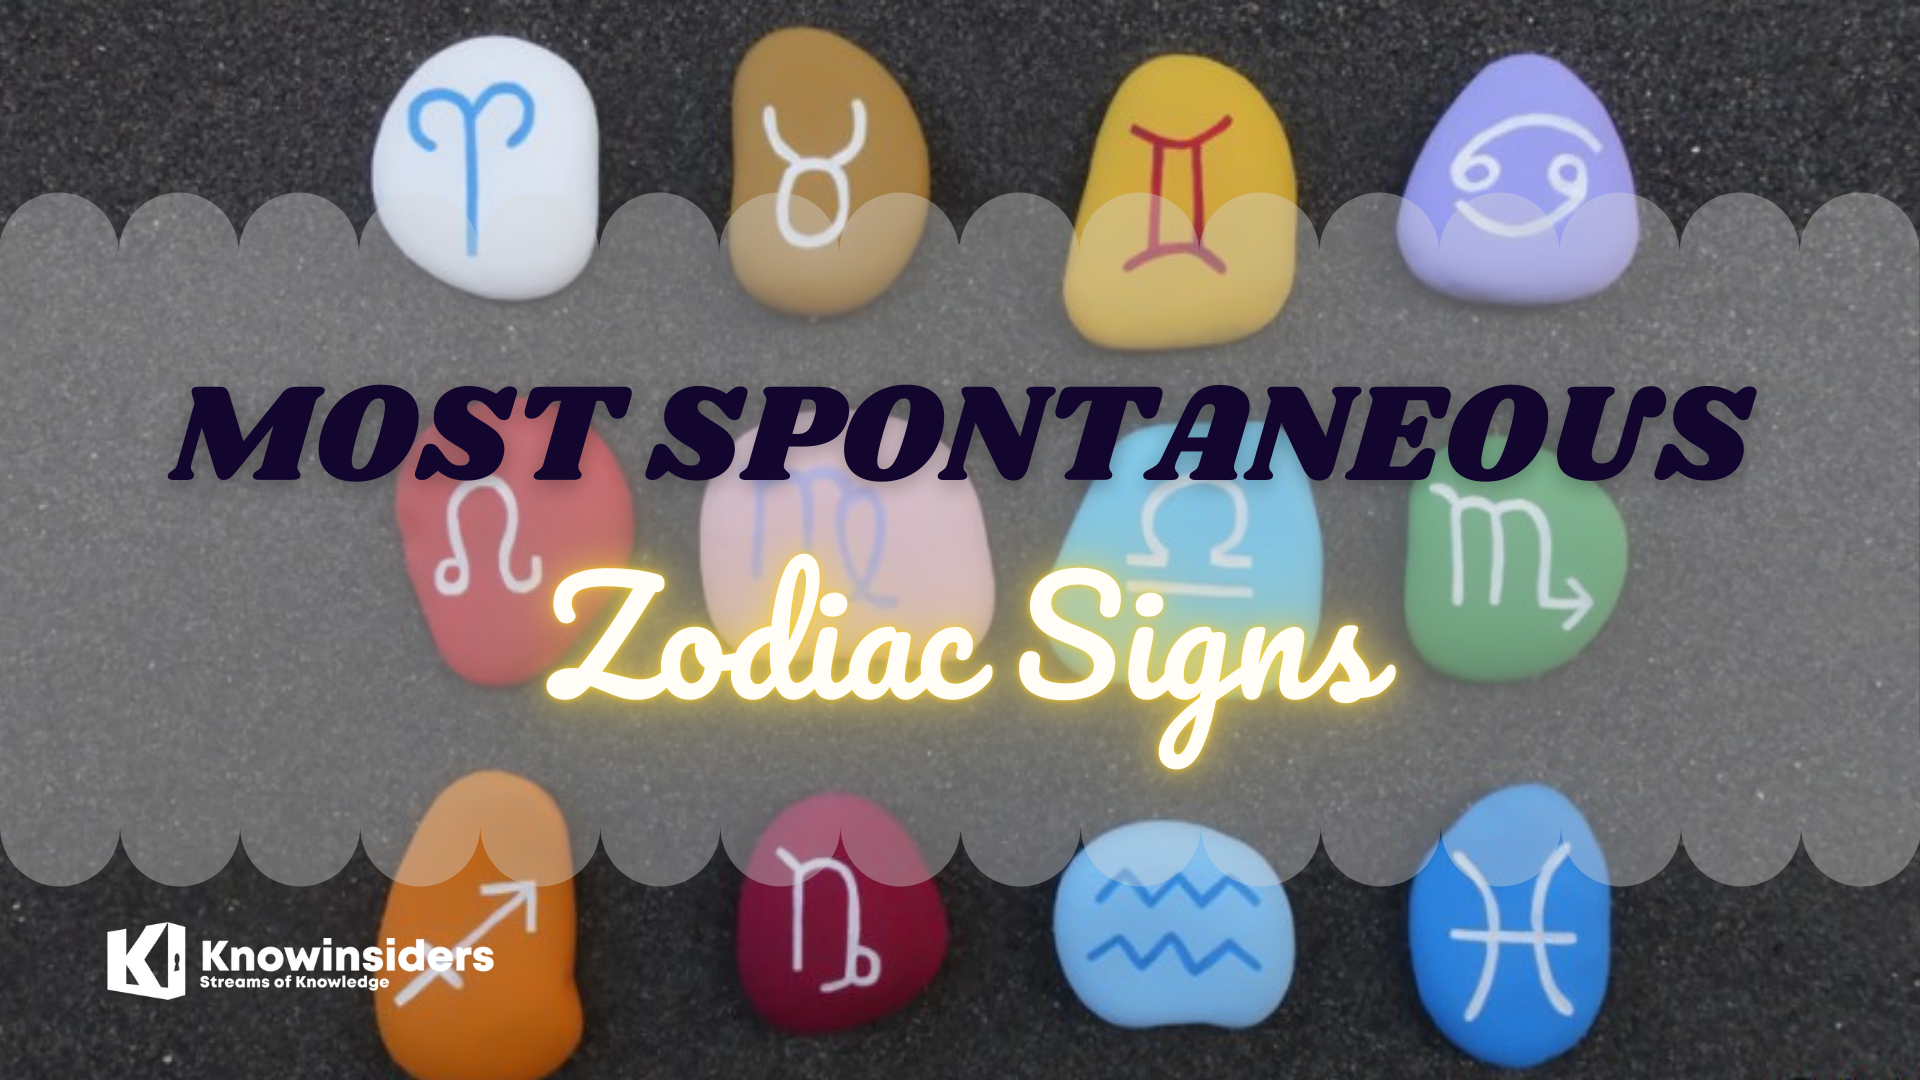 Top 5 Zodiac Signs Are the Most Spontaneous - Astrological Prediction